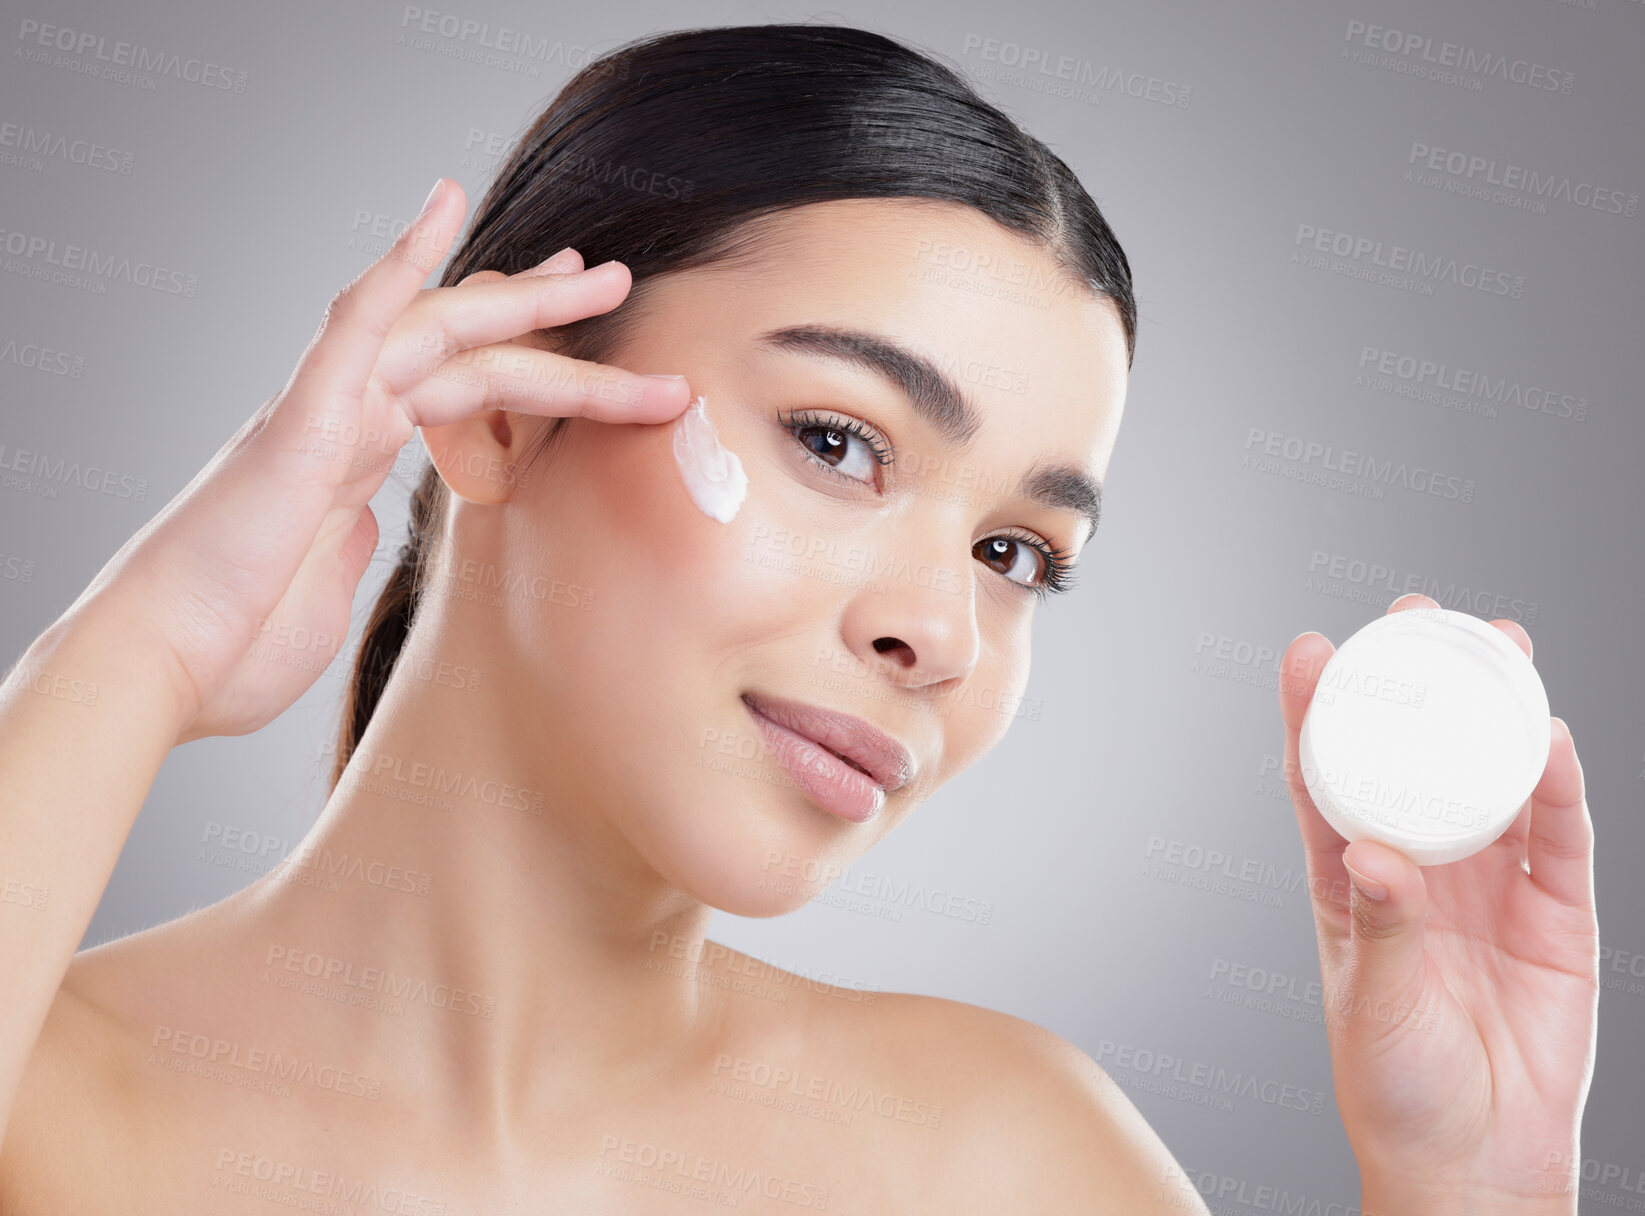 Buy stock photo Studio portrait of an attractive young woman applying lotion to her face against a grey background